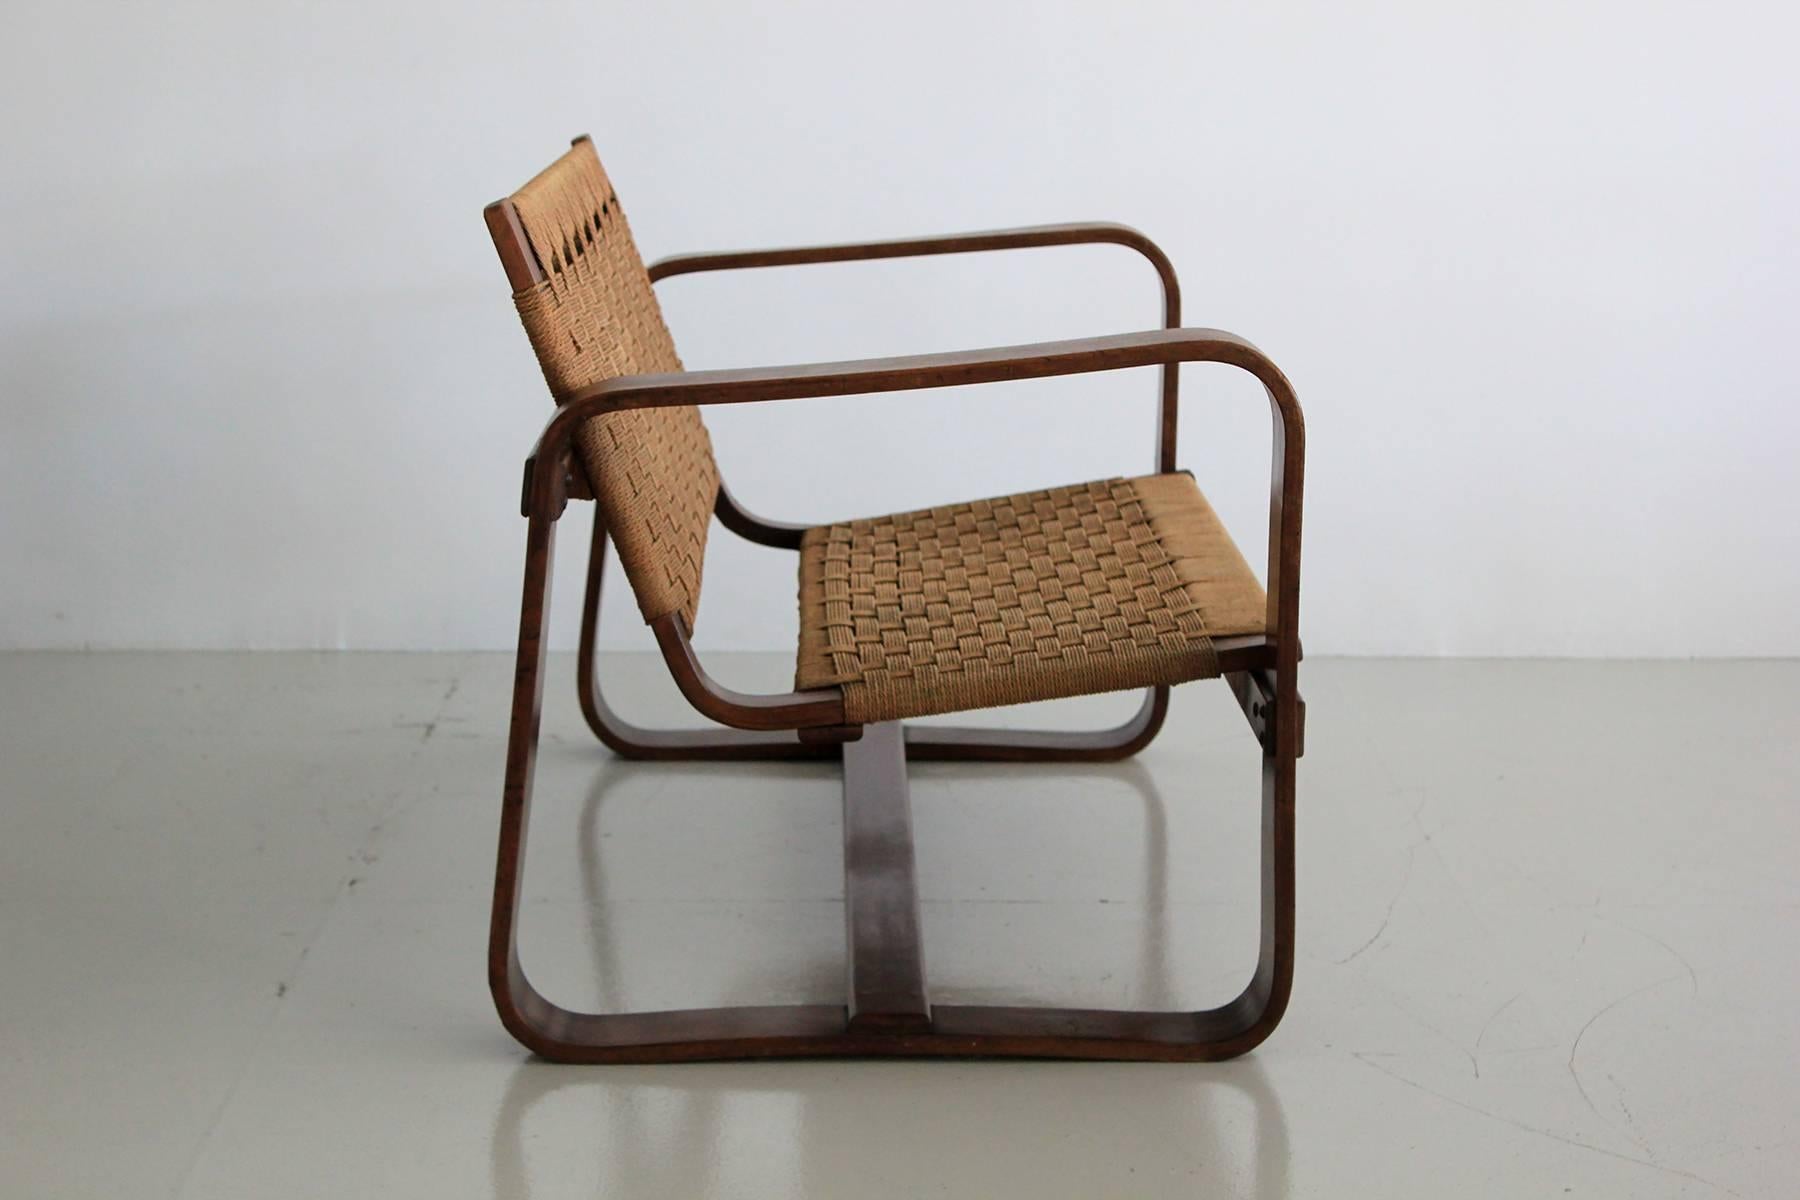 Giuseppe Pagano Pogatschnig. 'Bocconi' two-seat sofa, circa 1939.
Made by Gino Maggioni. 
Beautiful patina on bentwood with cording.

Arm height: 23.5.